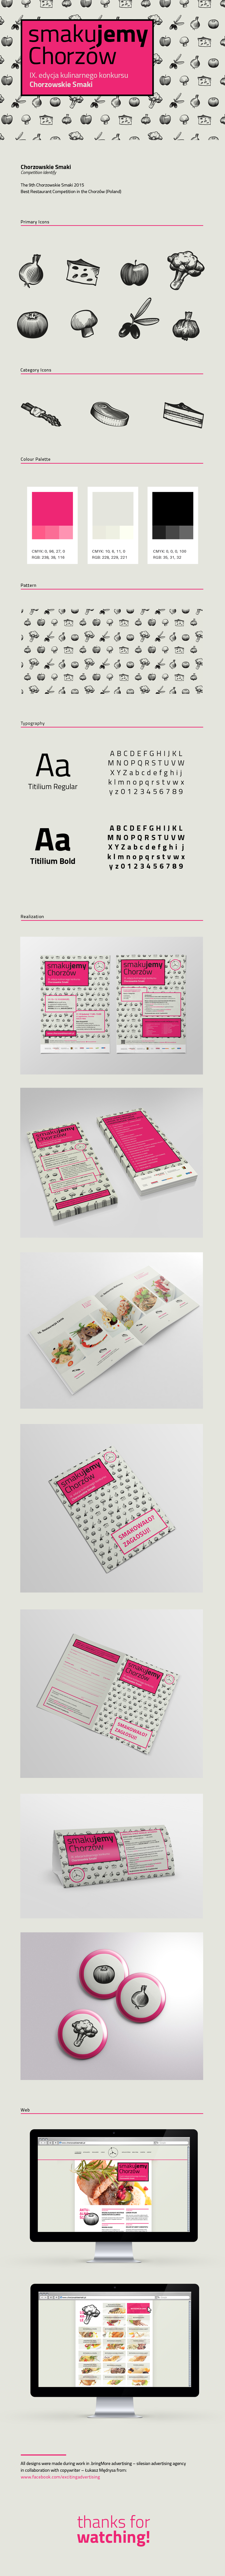 restaurant Food  Competition fastival contest pink Retro icons engraving vegetables chorzow dish poster brochure